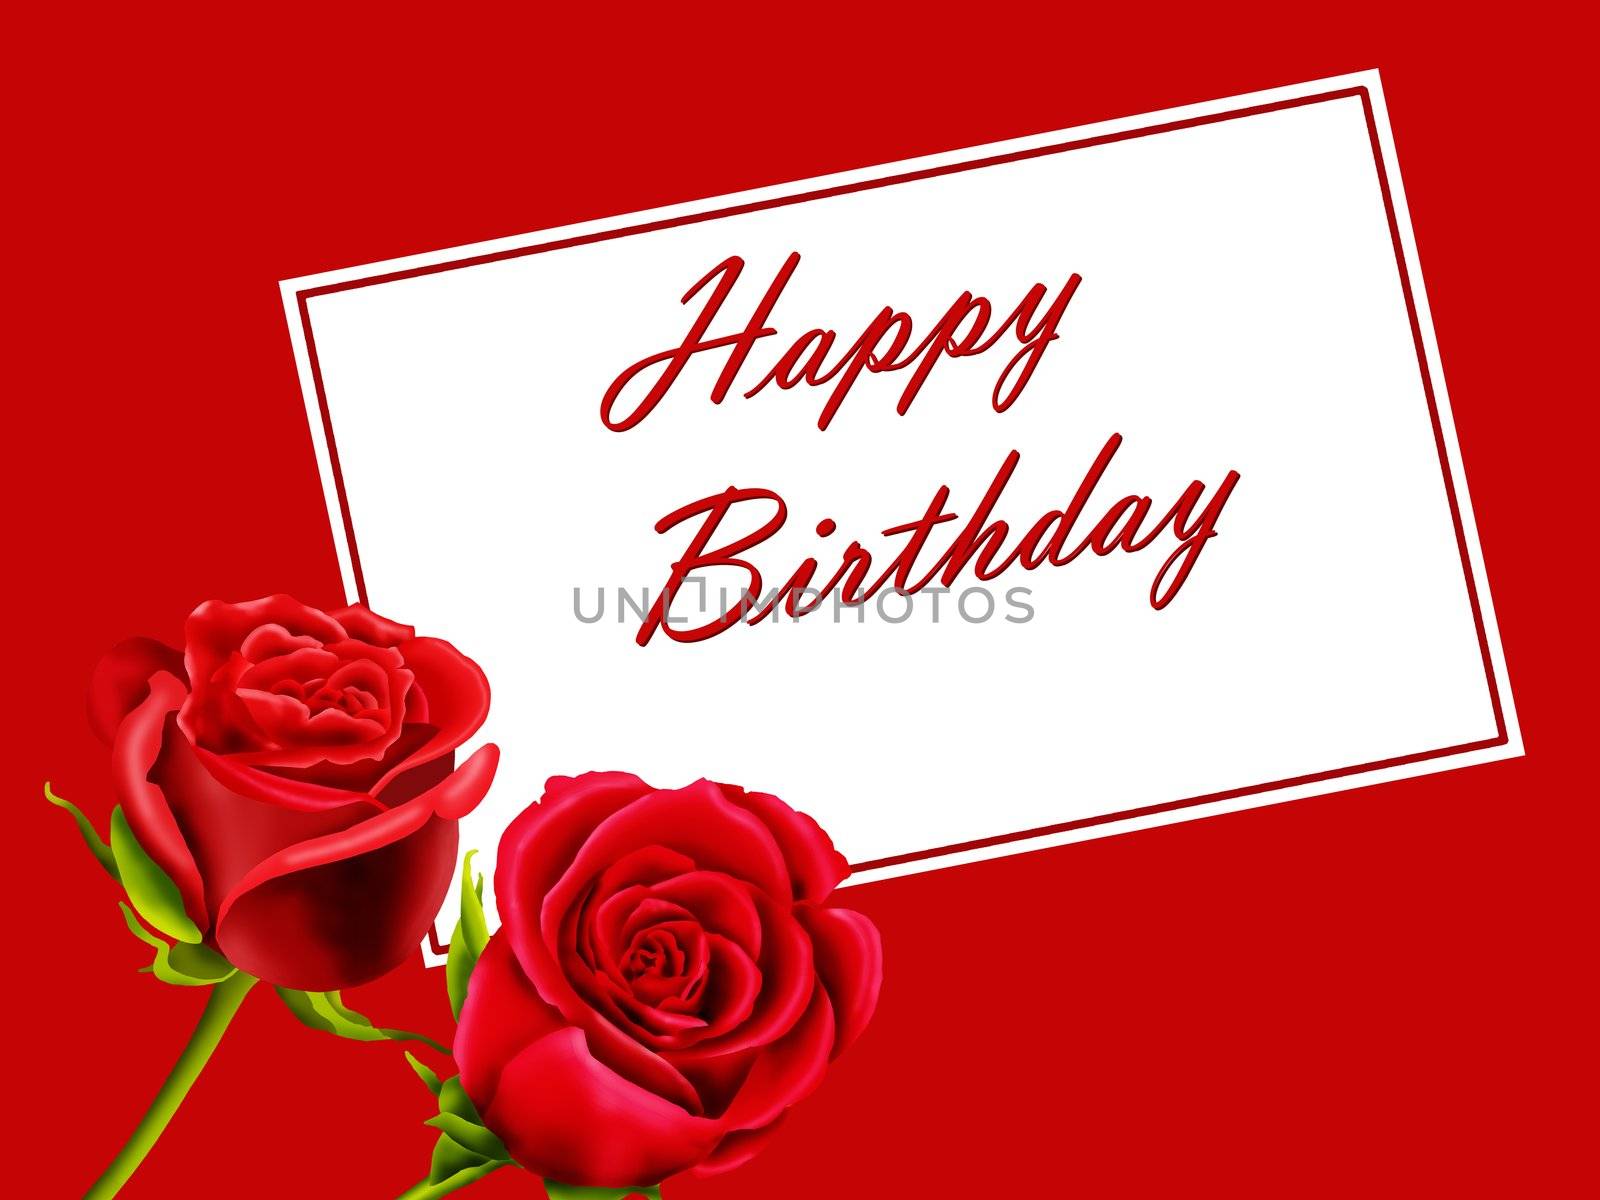 Happy Birthday card with red roses isolated on a red background